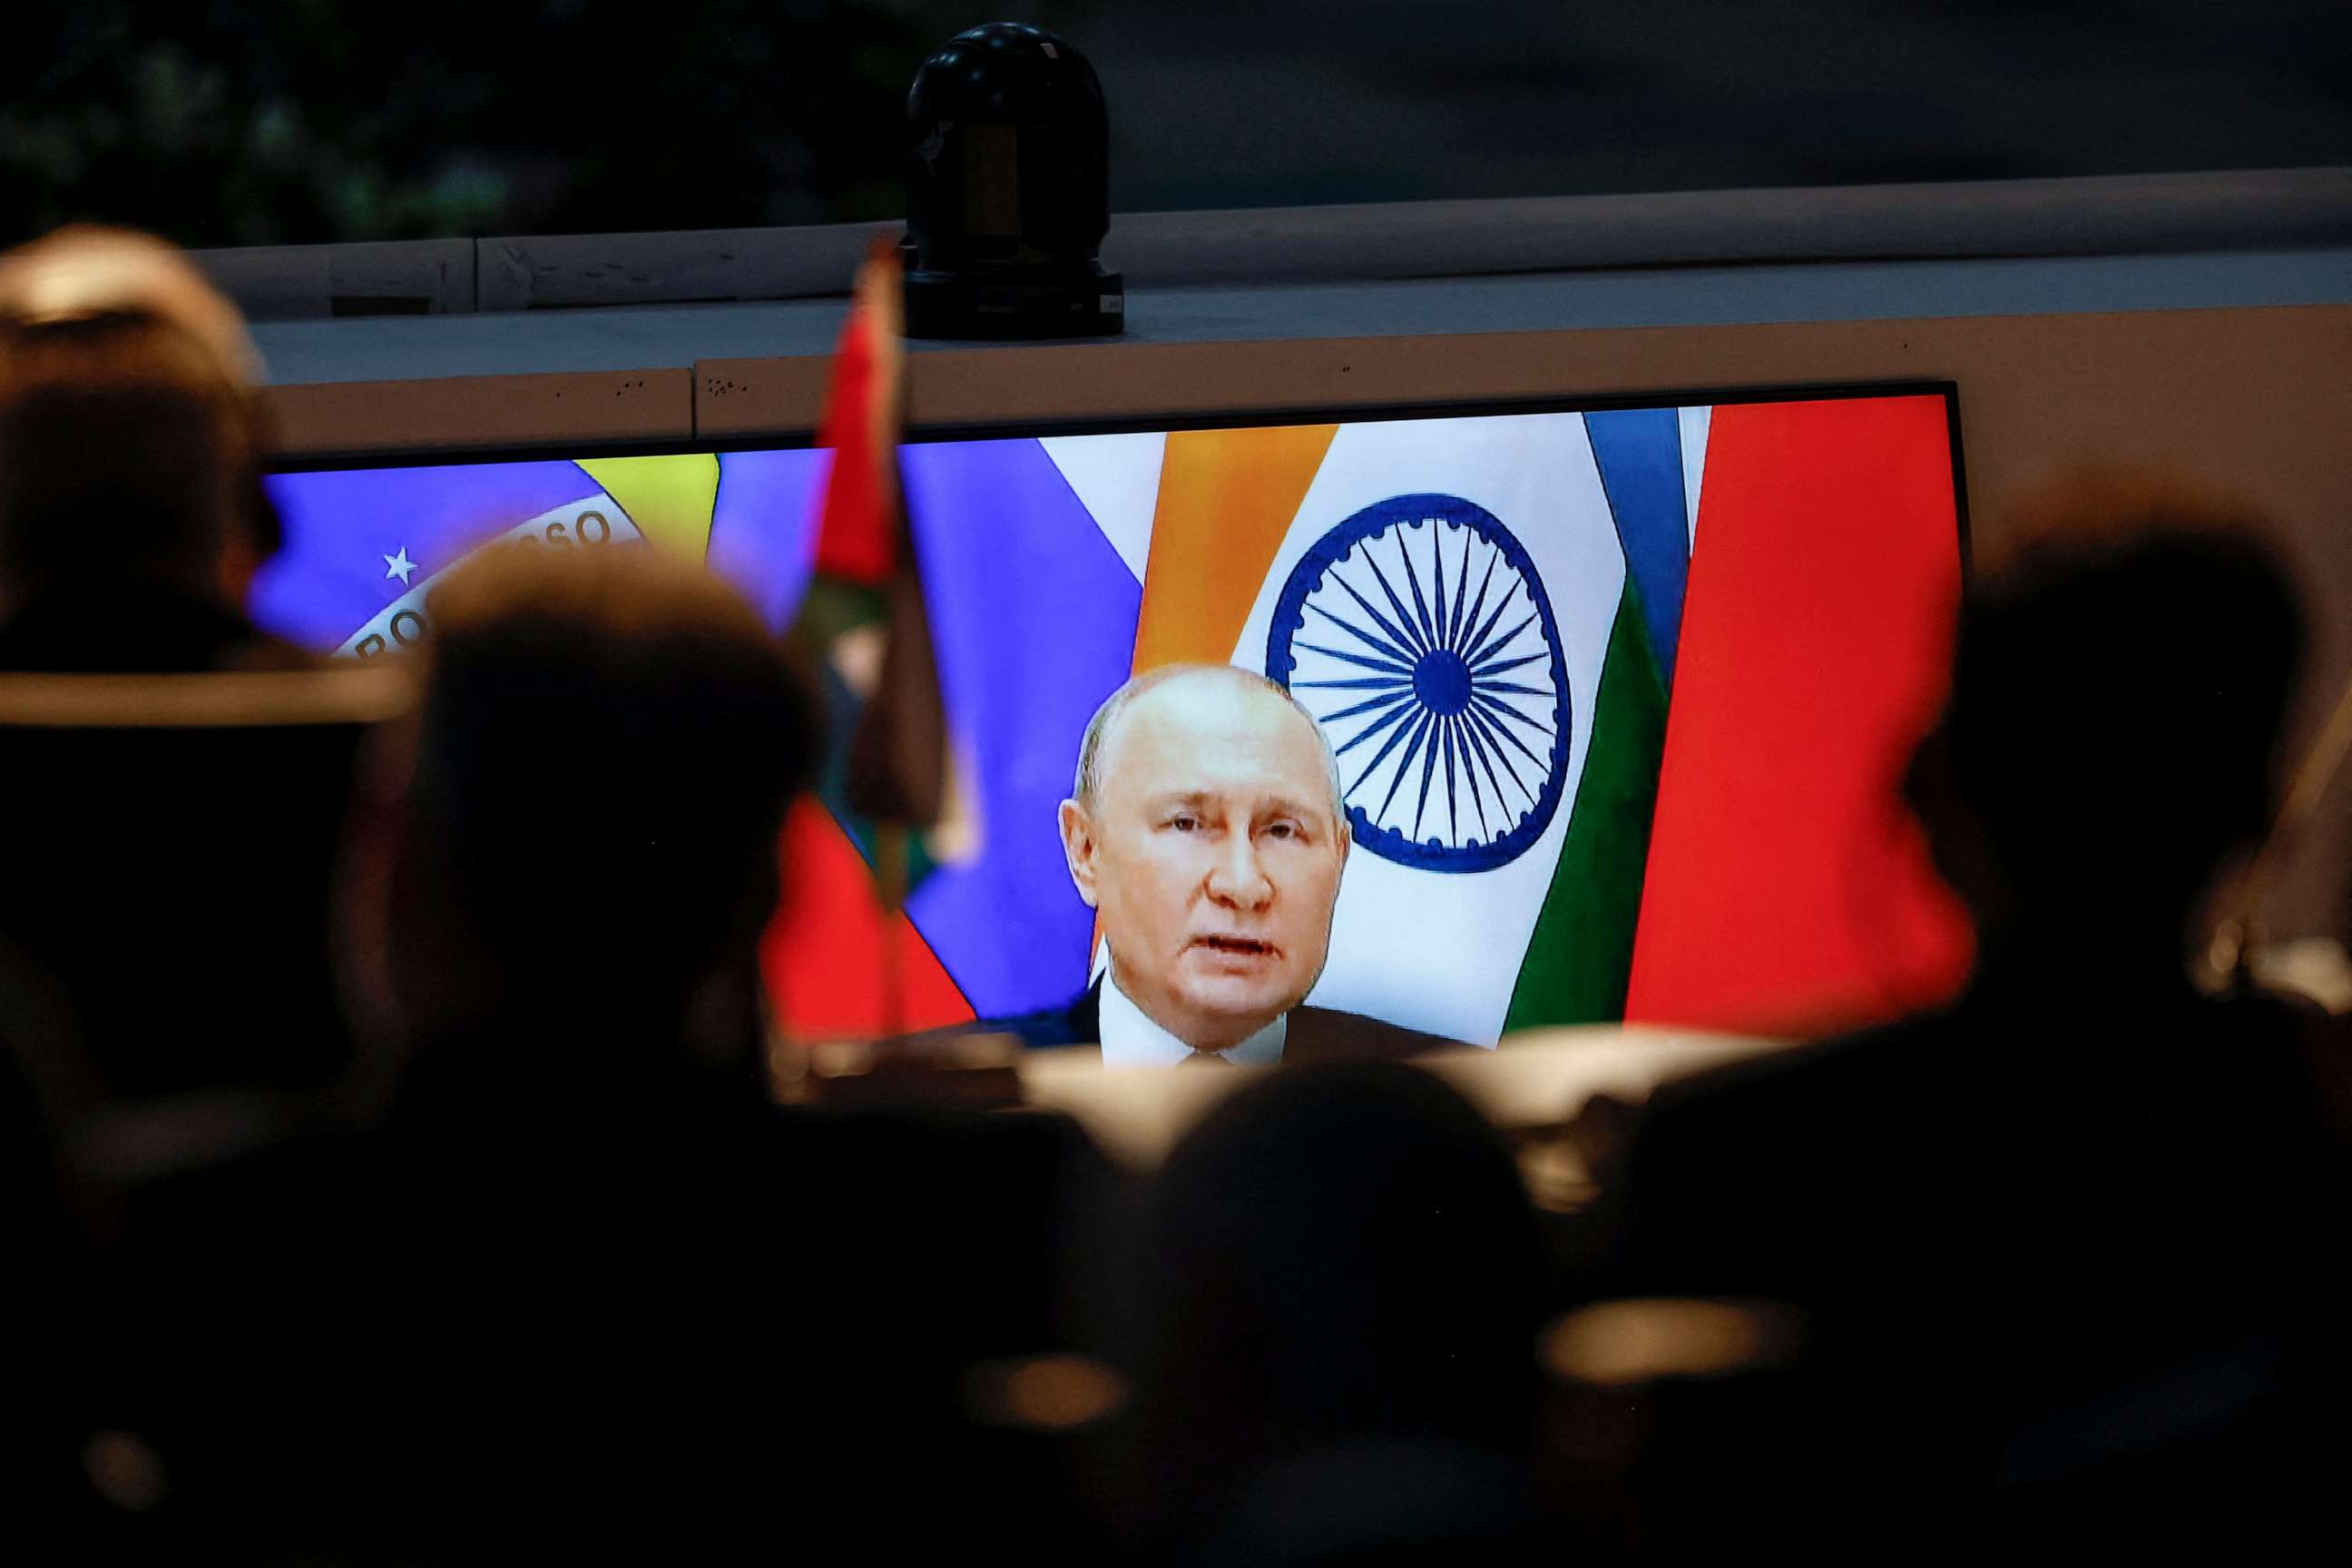 PHOTO: A screen shows Russian President Vladimir Putin virtually delivering remarks as delegates look on while attending a meeting during the 2023 BRICS Summit at the Sandton Convention Centre in Johannesburg on August 24, 2023.